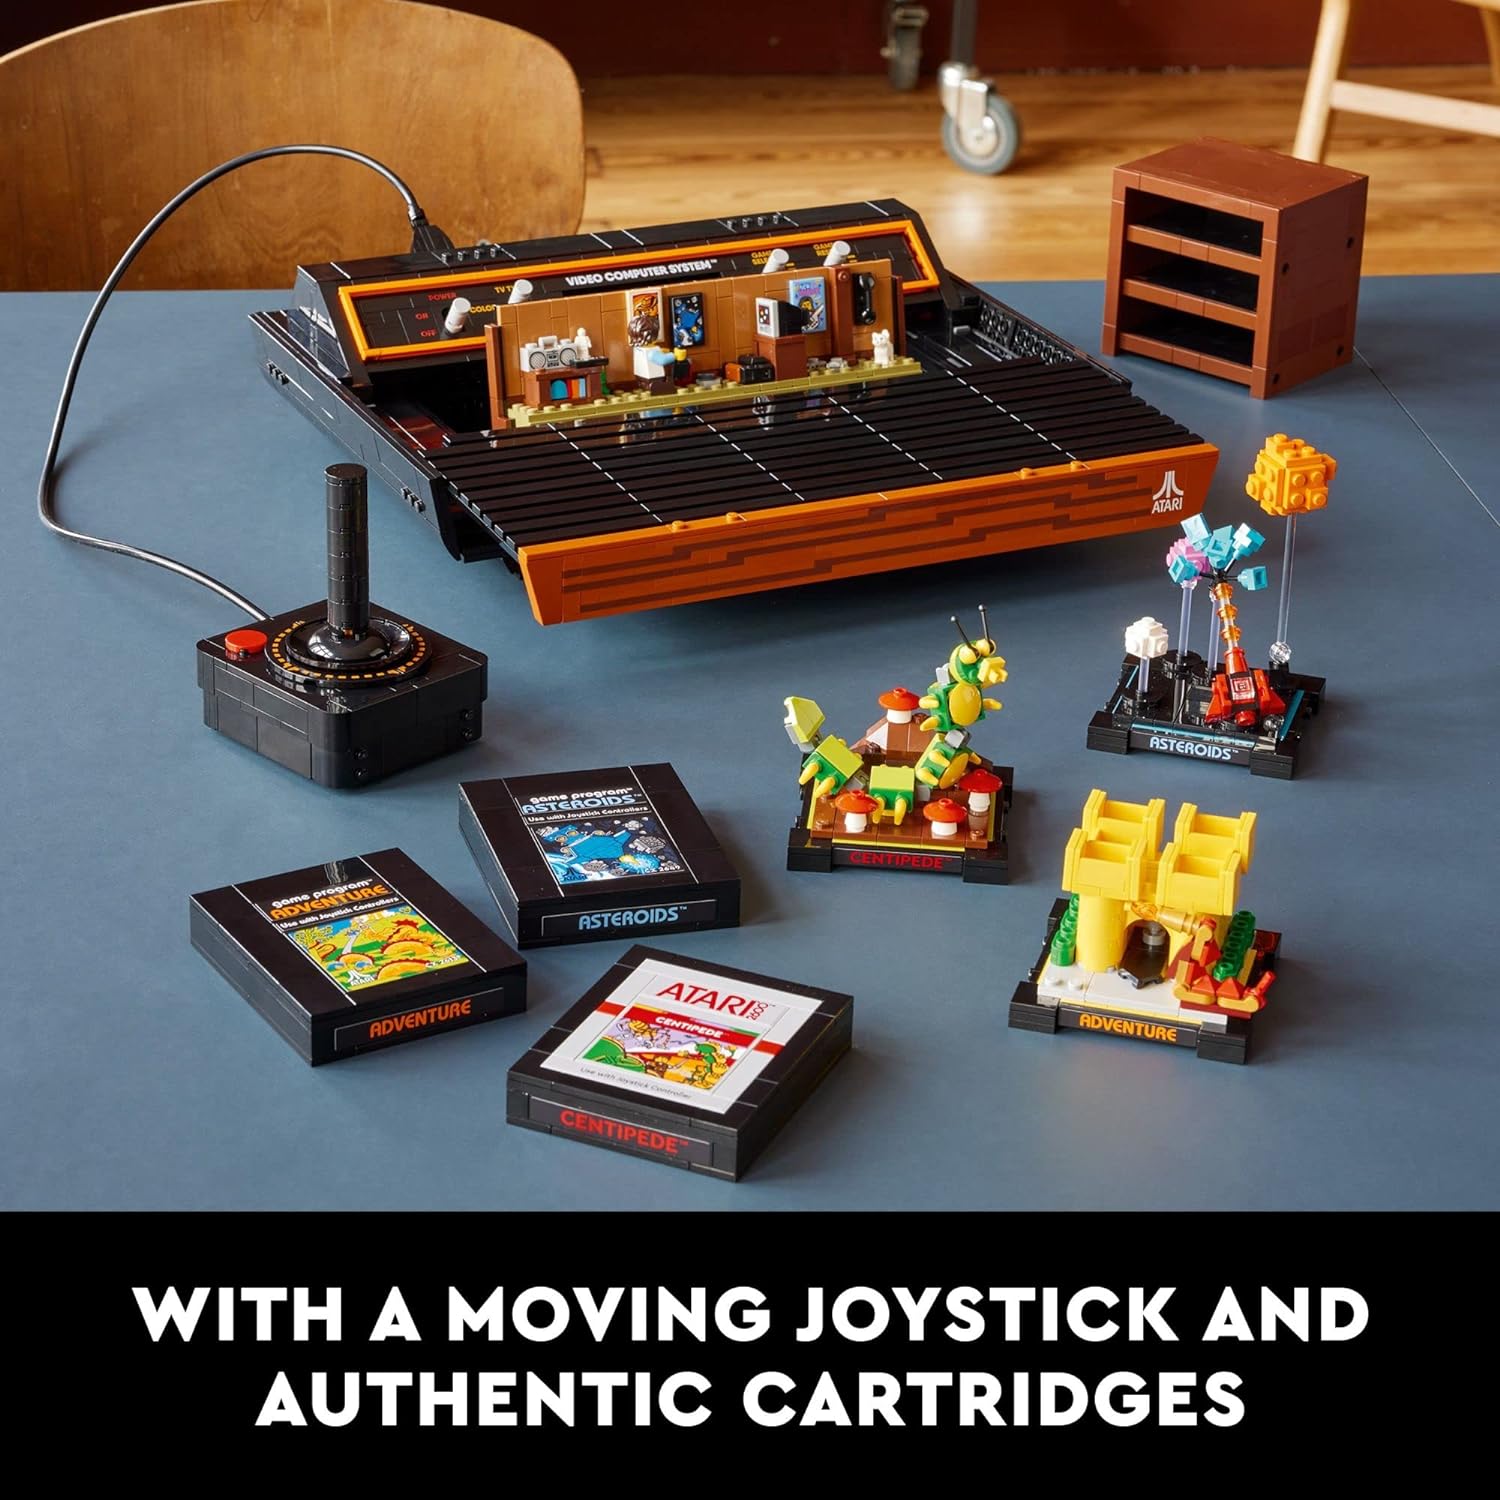 LEGO 10306 Icons Atari 2600 Building Set 10306 - Retro Video Game Console and Gaming Cartridge Replicas, Featuring Minifigure and Joystick, Nostalgic 80s Gift for Gamers and Adults